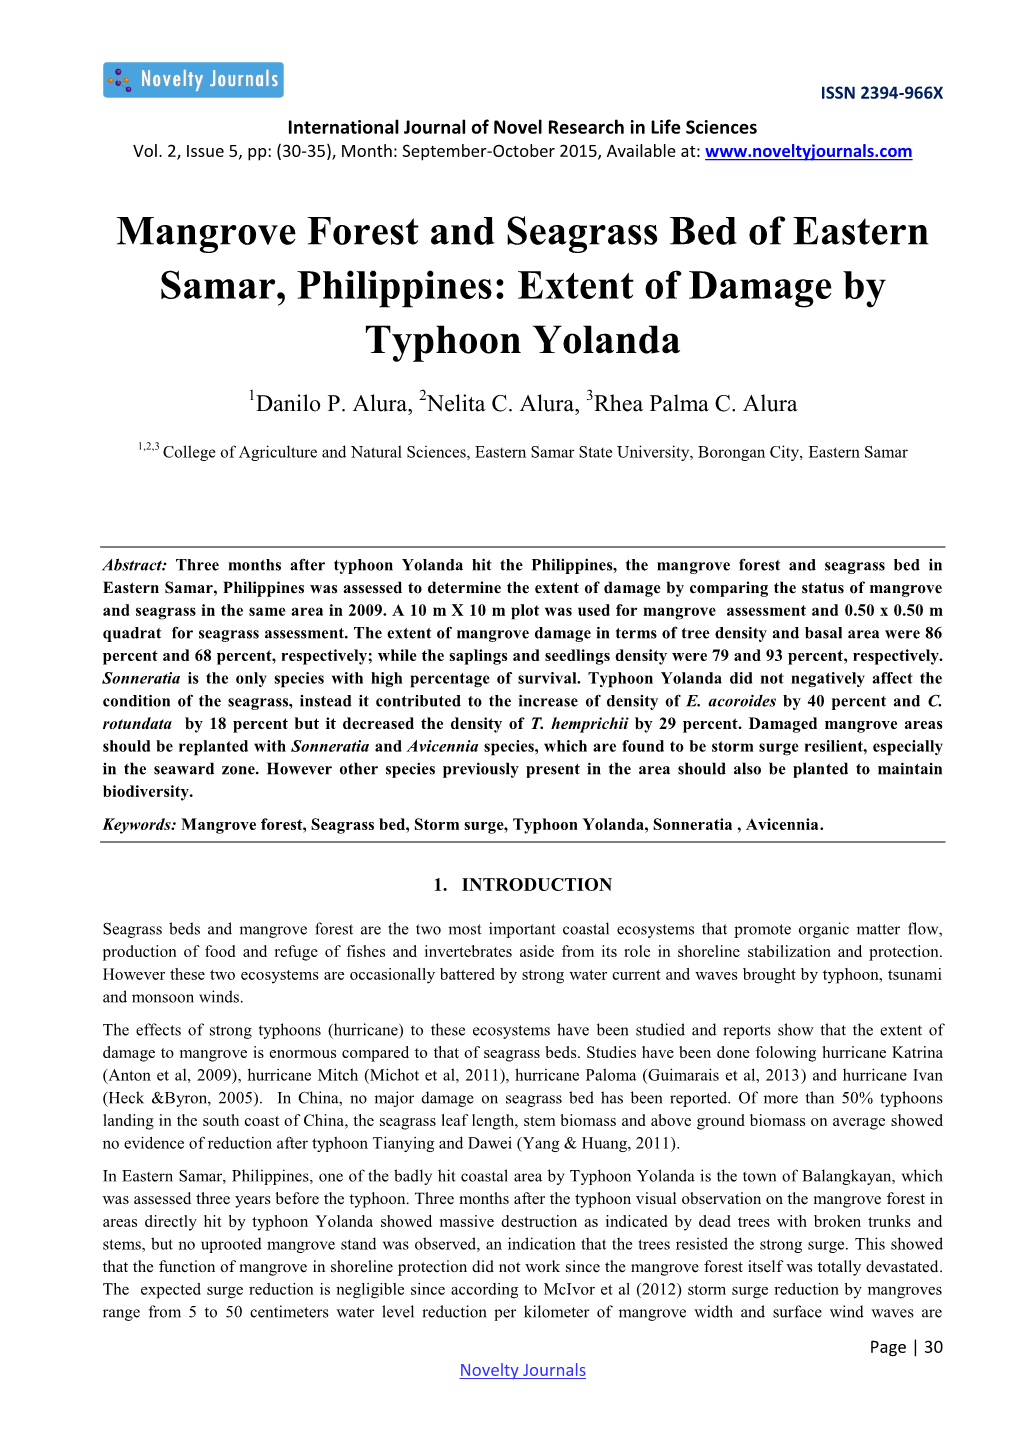 Mangrove Forest and Seagrass Bed of Eastern Samar, Philippines: Extent of Damage by Typhoon Yolanda